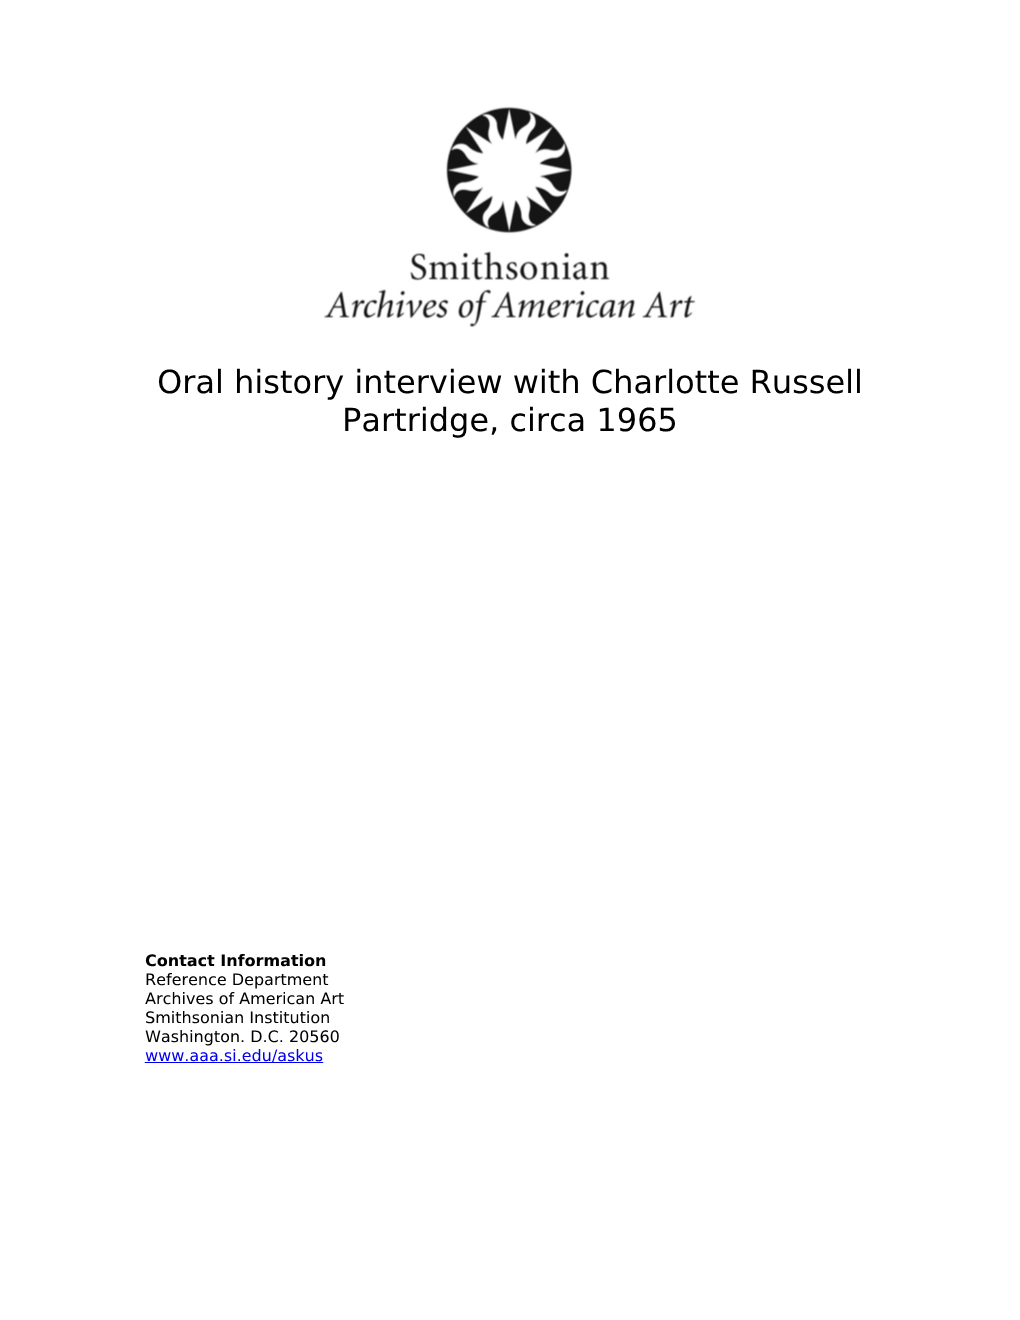 Oral History Interview with Charlotte Russell Partridge, Circa 1965